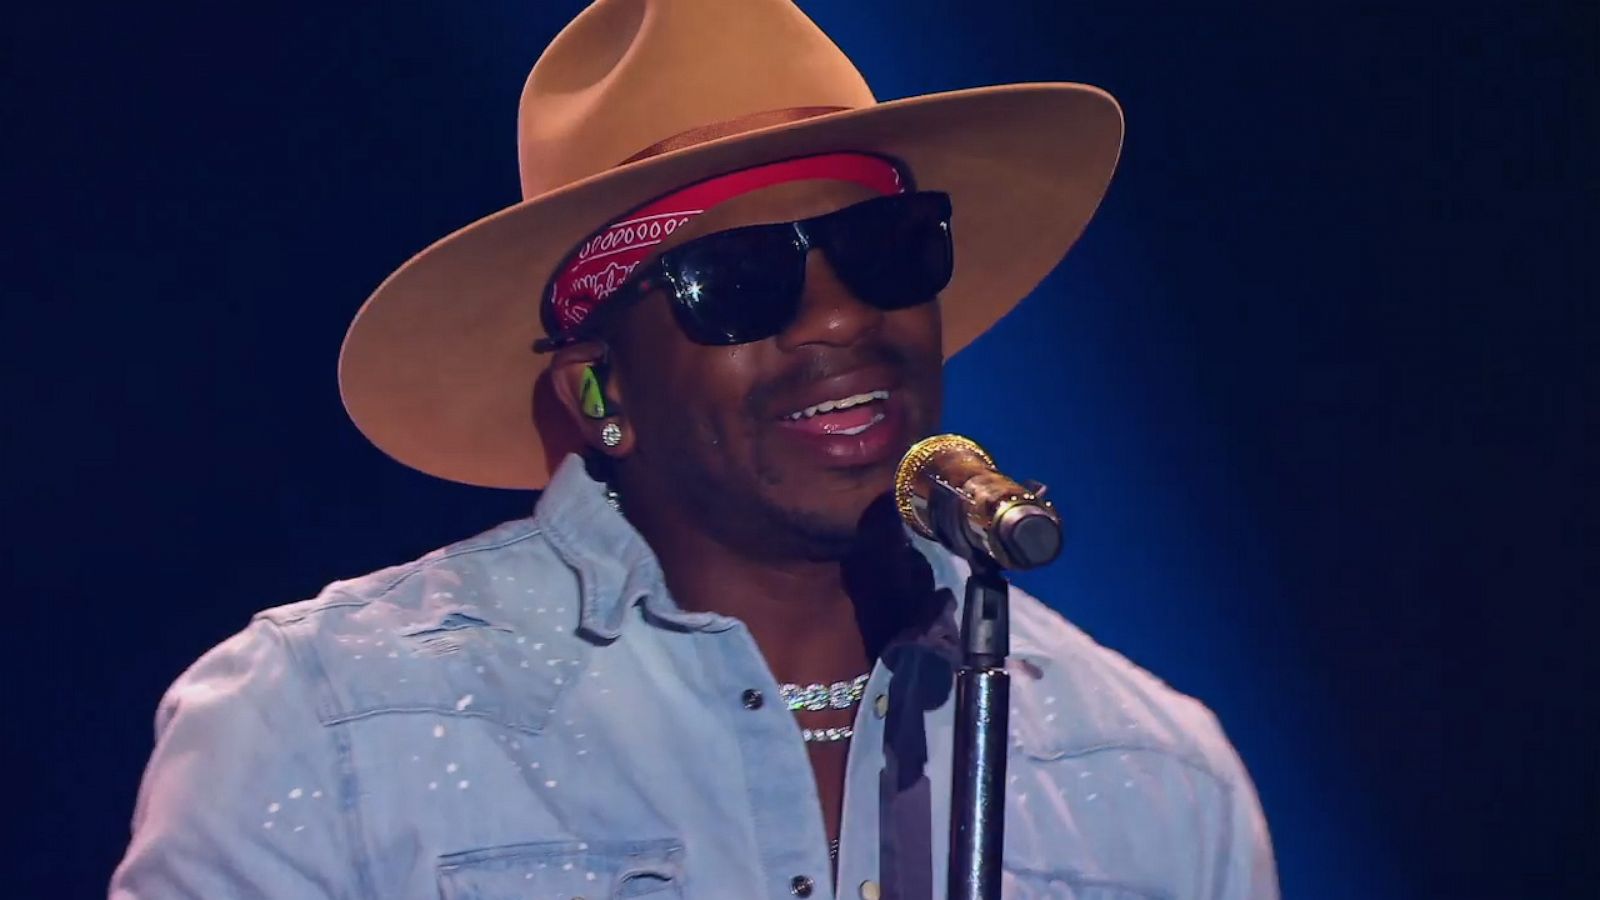 Jimmie Allen is paving the way for Black Country music - Good Morning  America